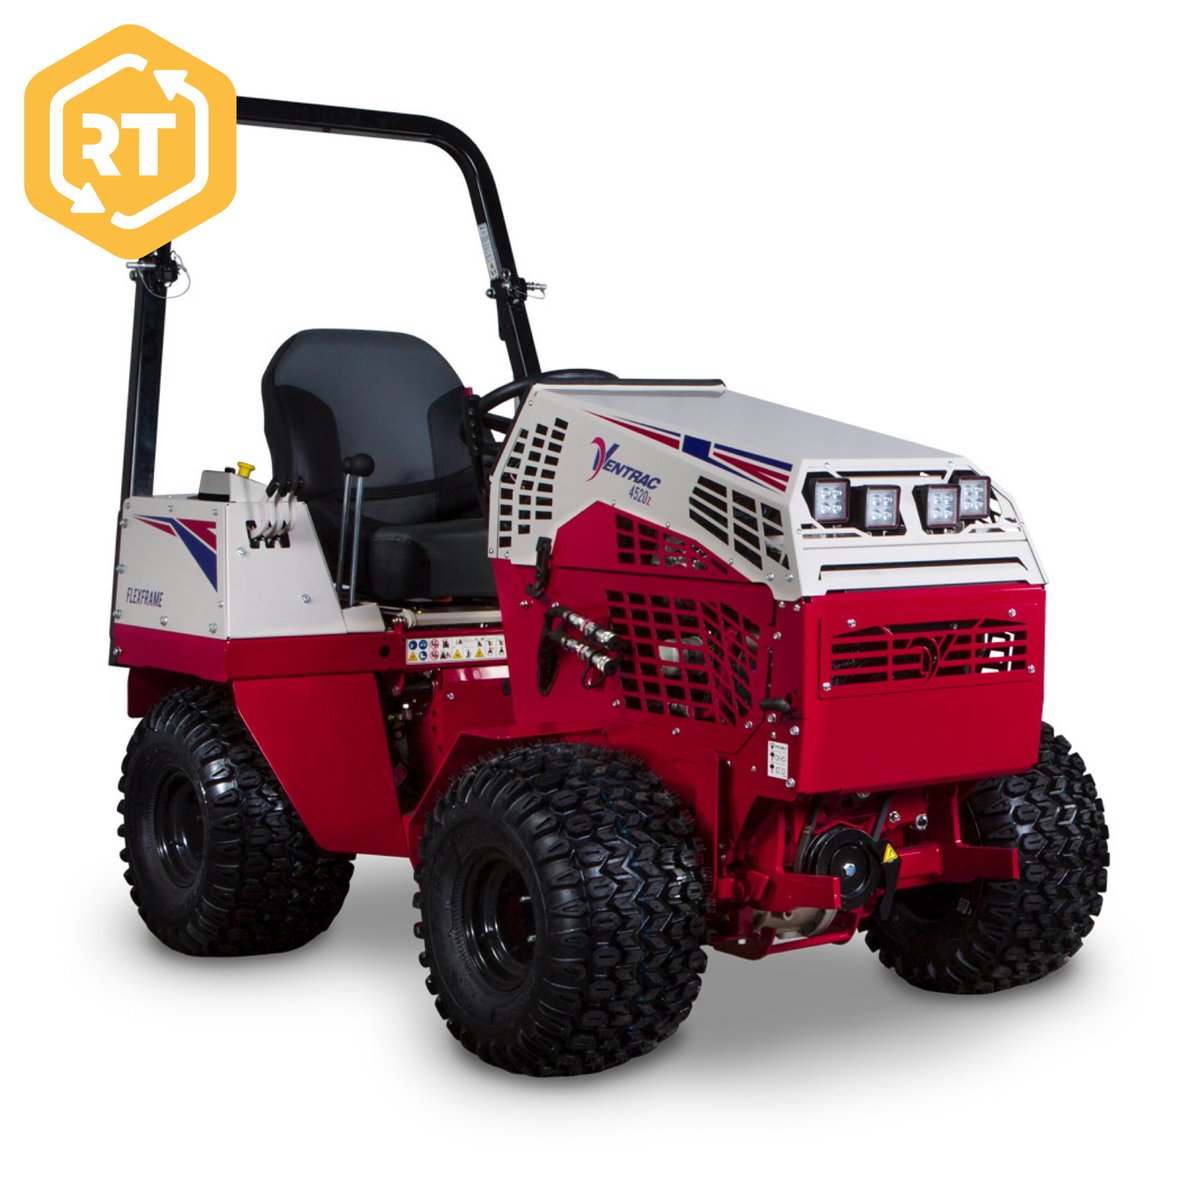 The Ventrac is available to hire - Power unit and attachment or just attachment if you have the power unit already. 🙂🧡💪 Grass and brush cutting, leaf blowing, stump grinding, aerating, raking, clearance and more. 🌱🌿🍂🌳 👉 bit.ly/3thS3O1 @priceturfcare @ventrac